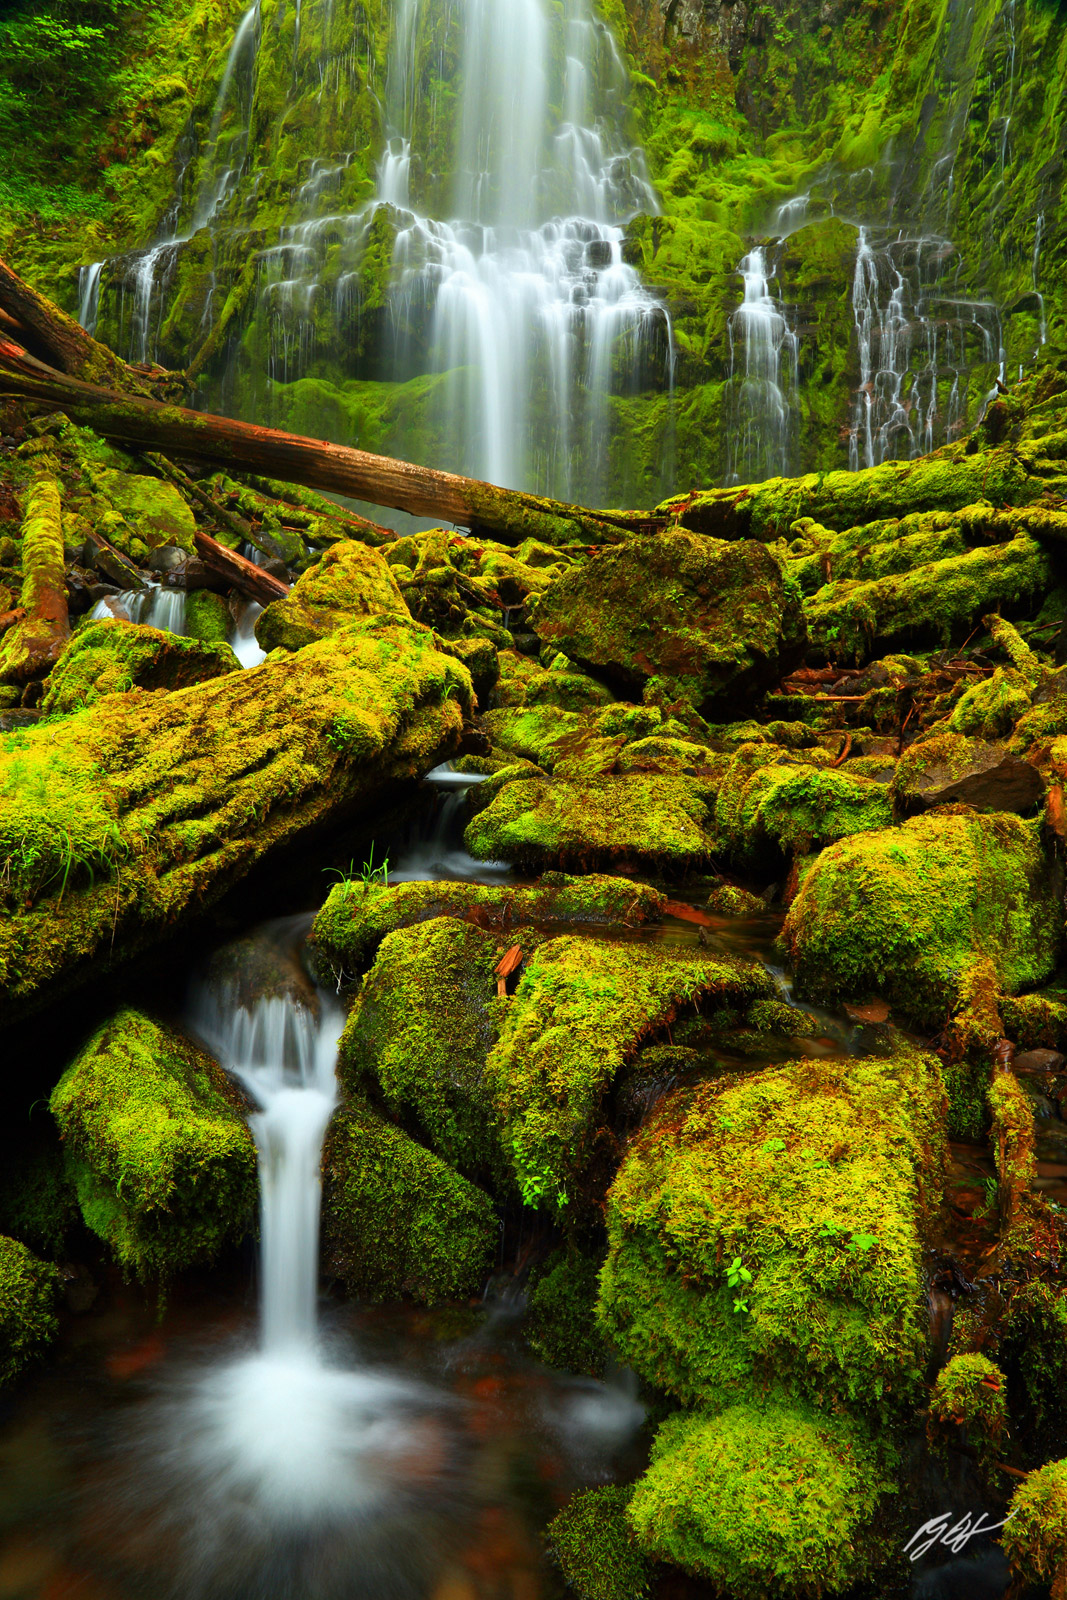 Mossy Scene and Proxy Falls in the Willamette National Forest in Oregon